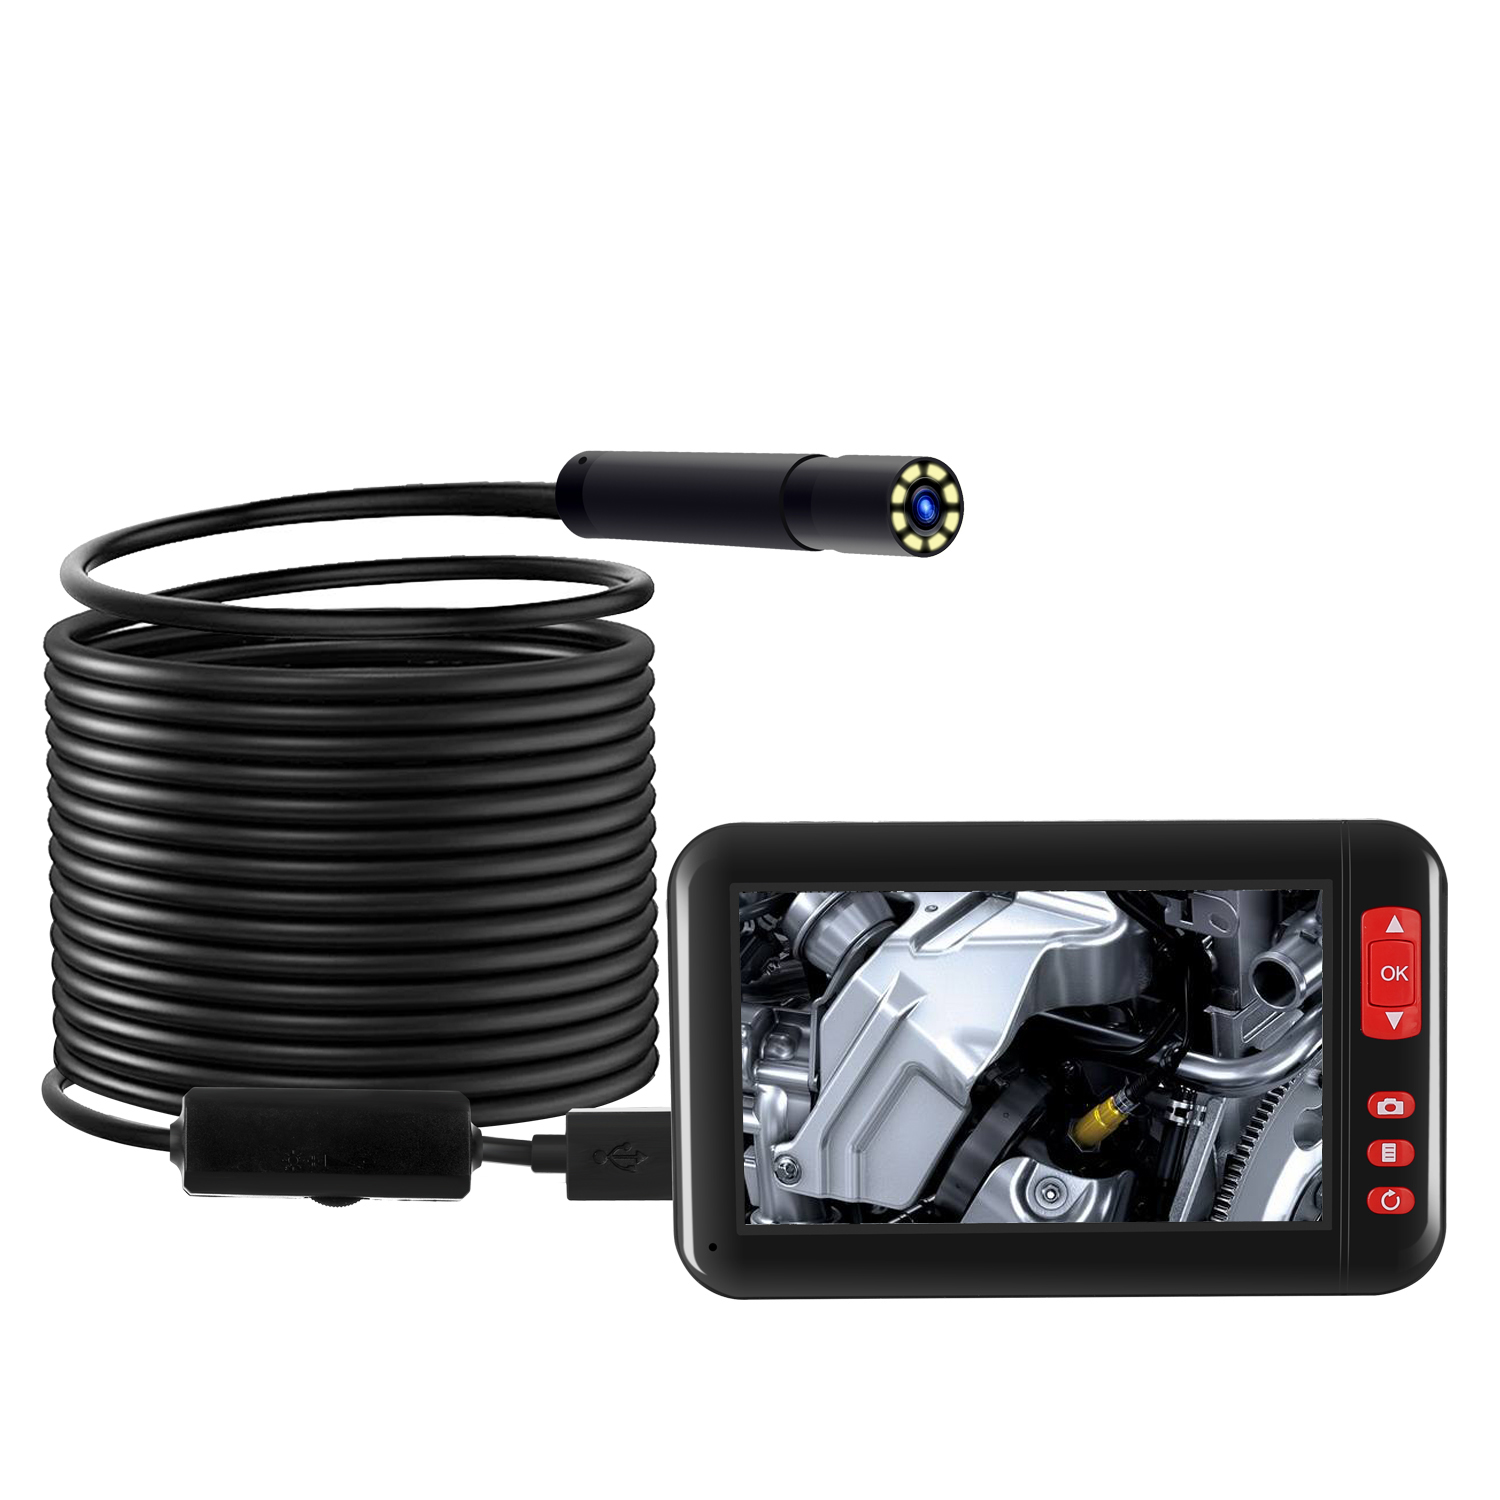 8mm 1080P Endoscope Camera with 4.3 Inch Screen Display 2000mAh 8 LED Light waterproof Inspection Borescope Camera 2 meters